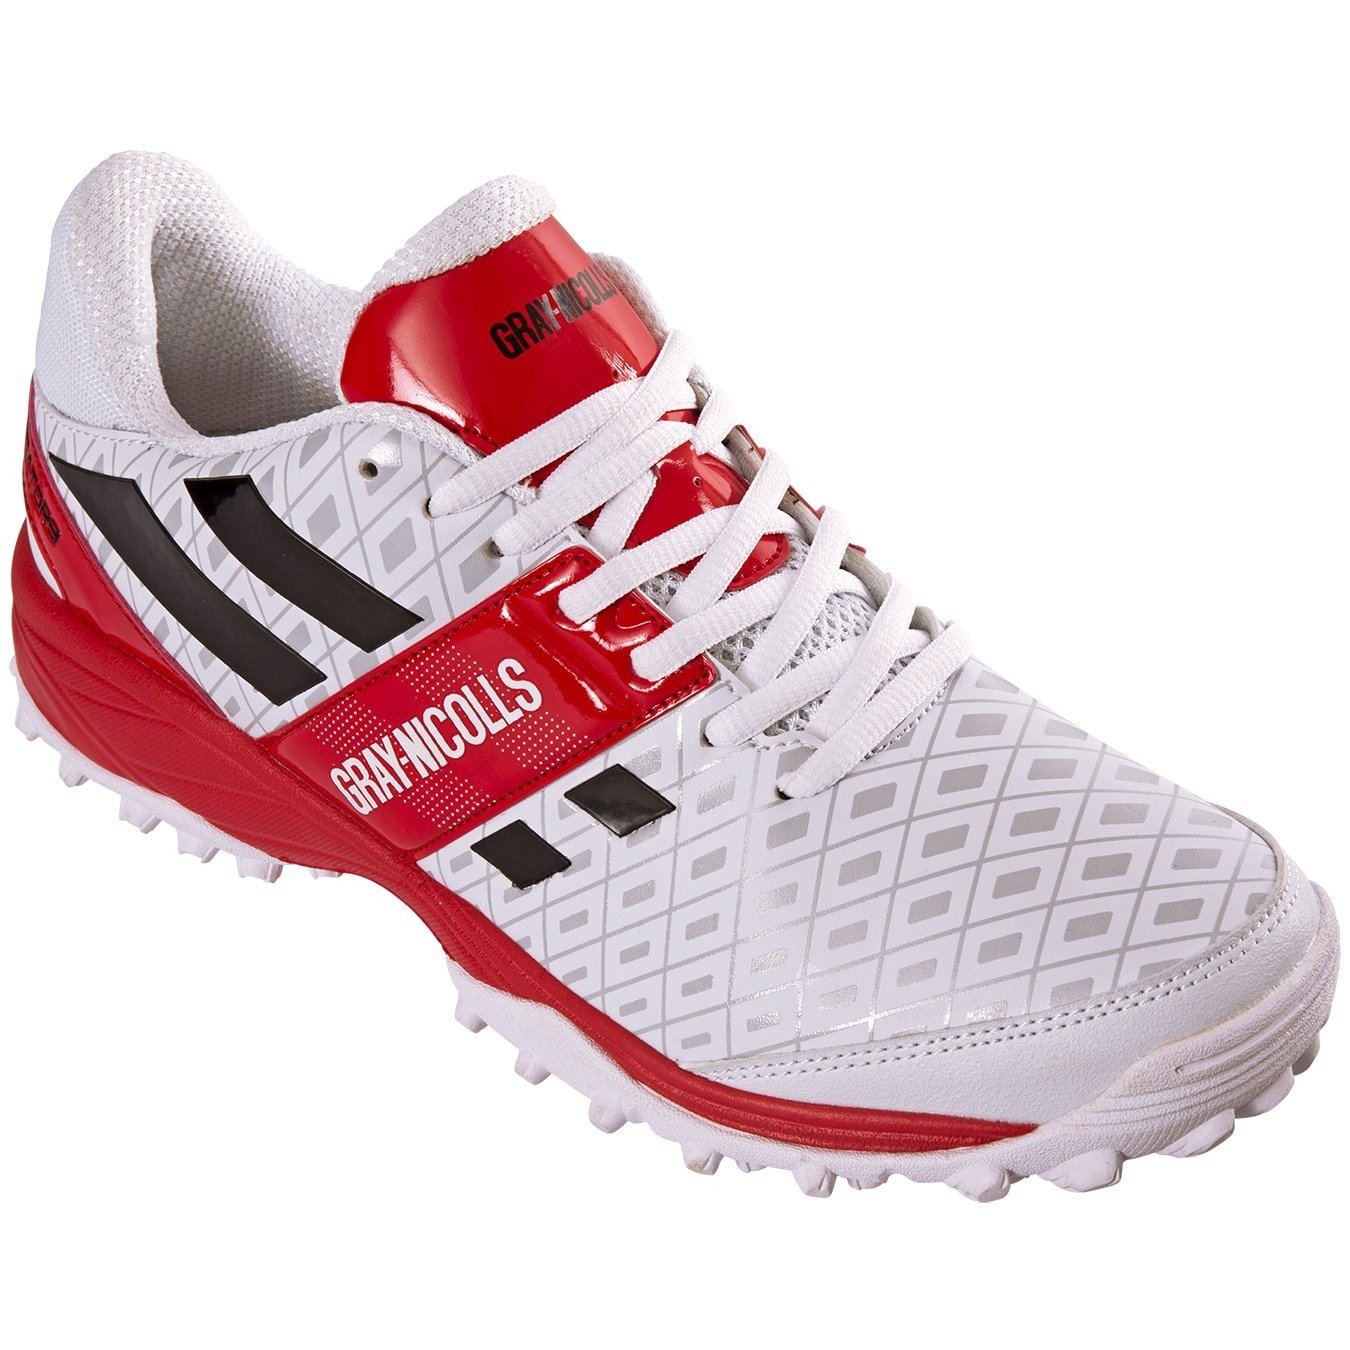 Gray Nicolls Atomic Rubber Shoes